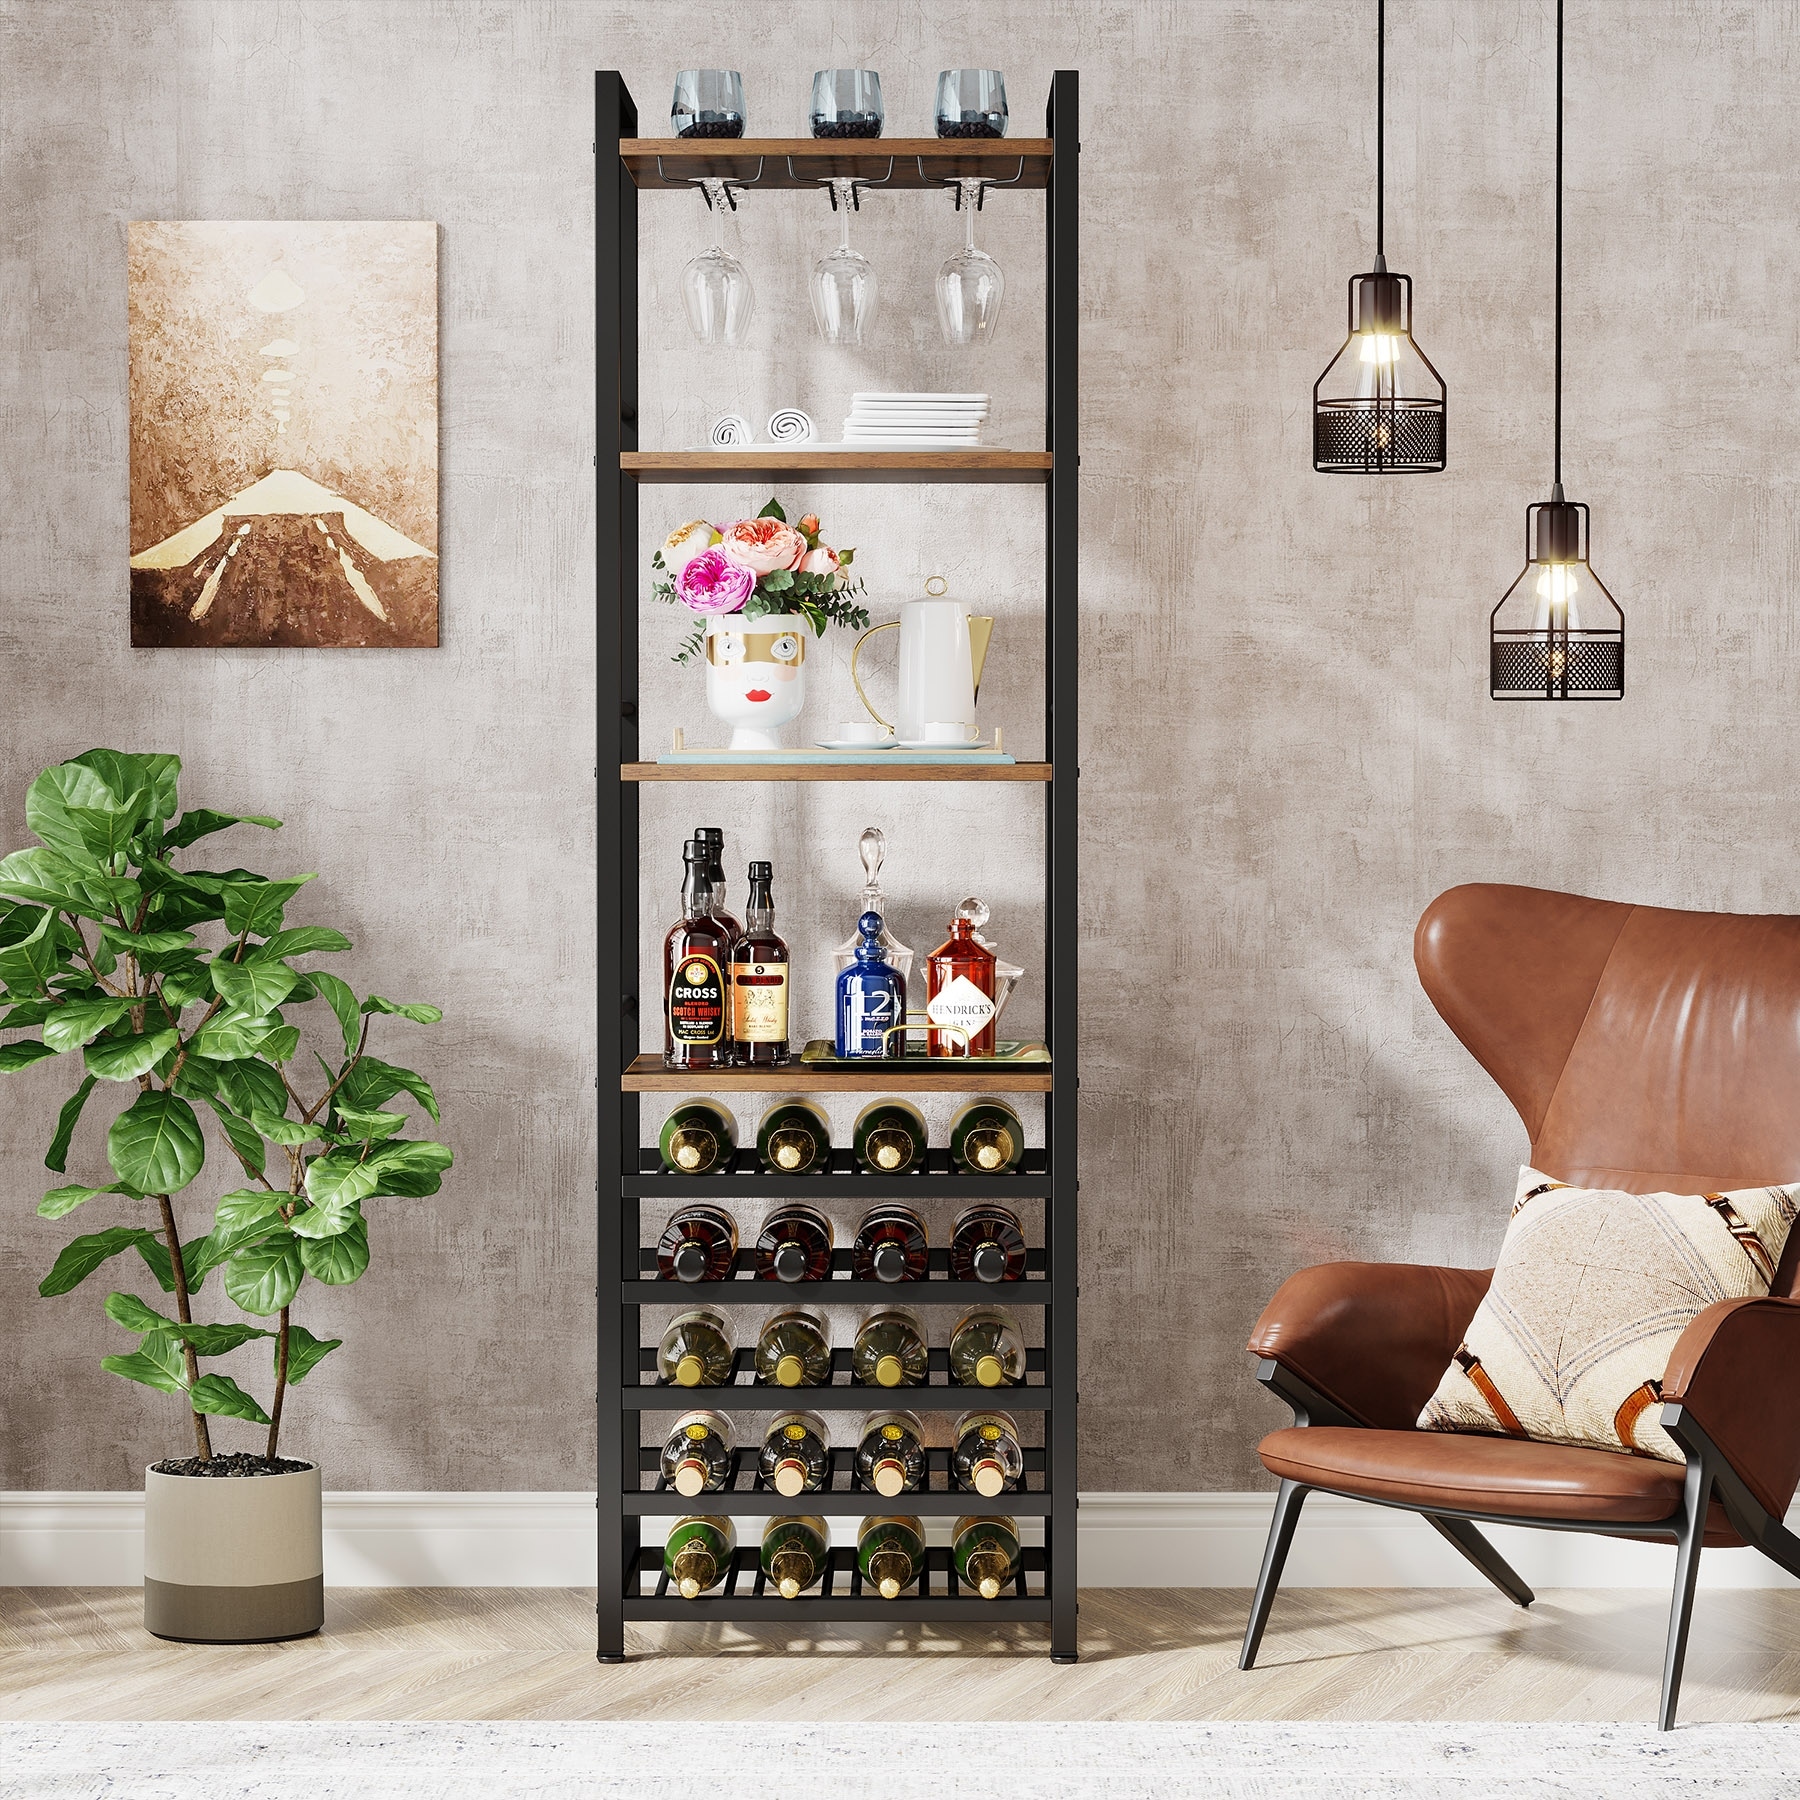 https://ak1.ostkcdn.com/images/products/is/images/direct/c33040066909cc0668d1fbc2e9f1cefe8578f63f/Freestanding-Wine-Rack-with-Glass-Holder-and-Storage-Shelves%2C-20-Bottle-Wine-Bakers-Rack-for-Home-Kitchen%2C-Dining-Room%2C-Brown.jpg